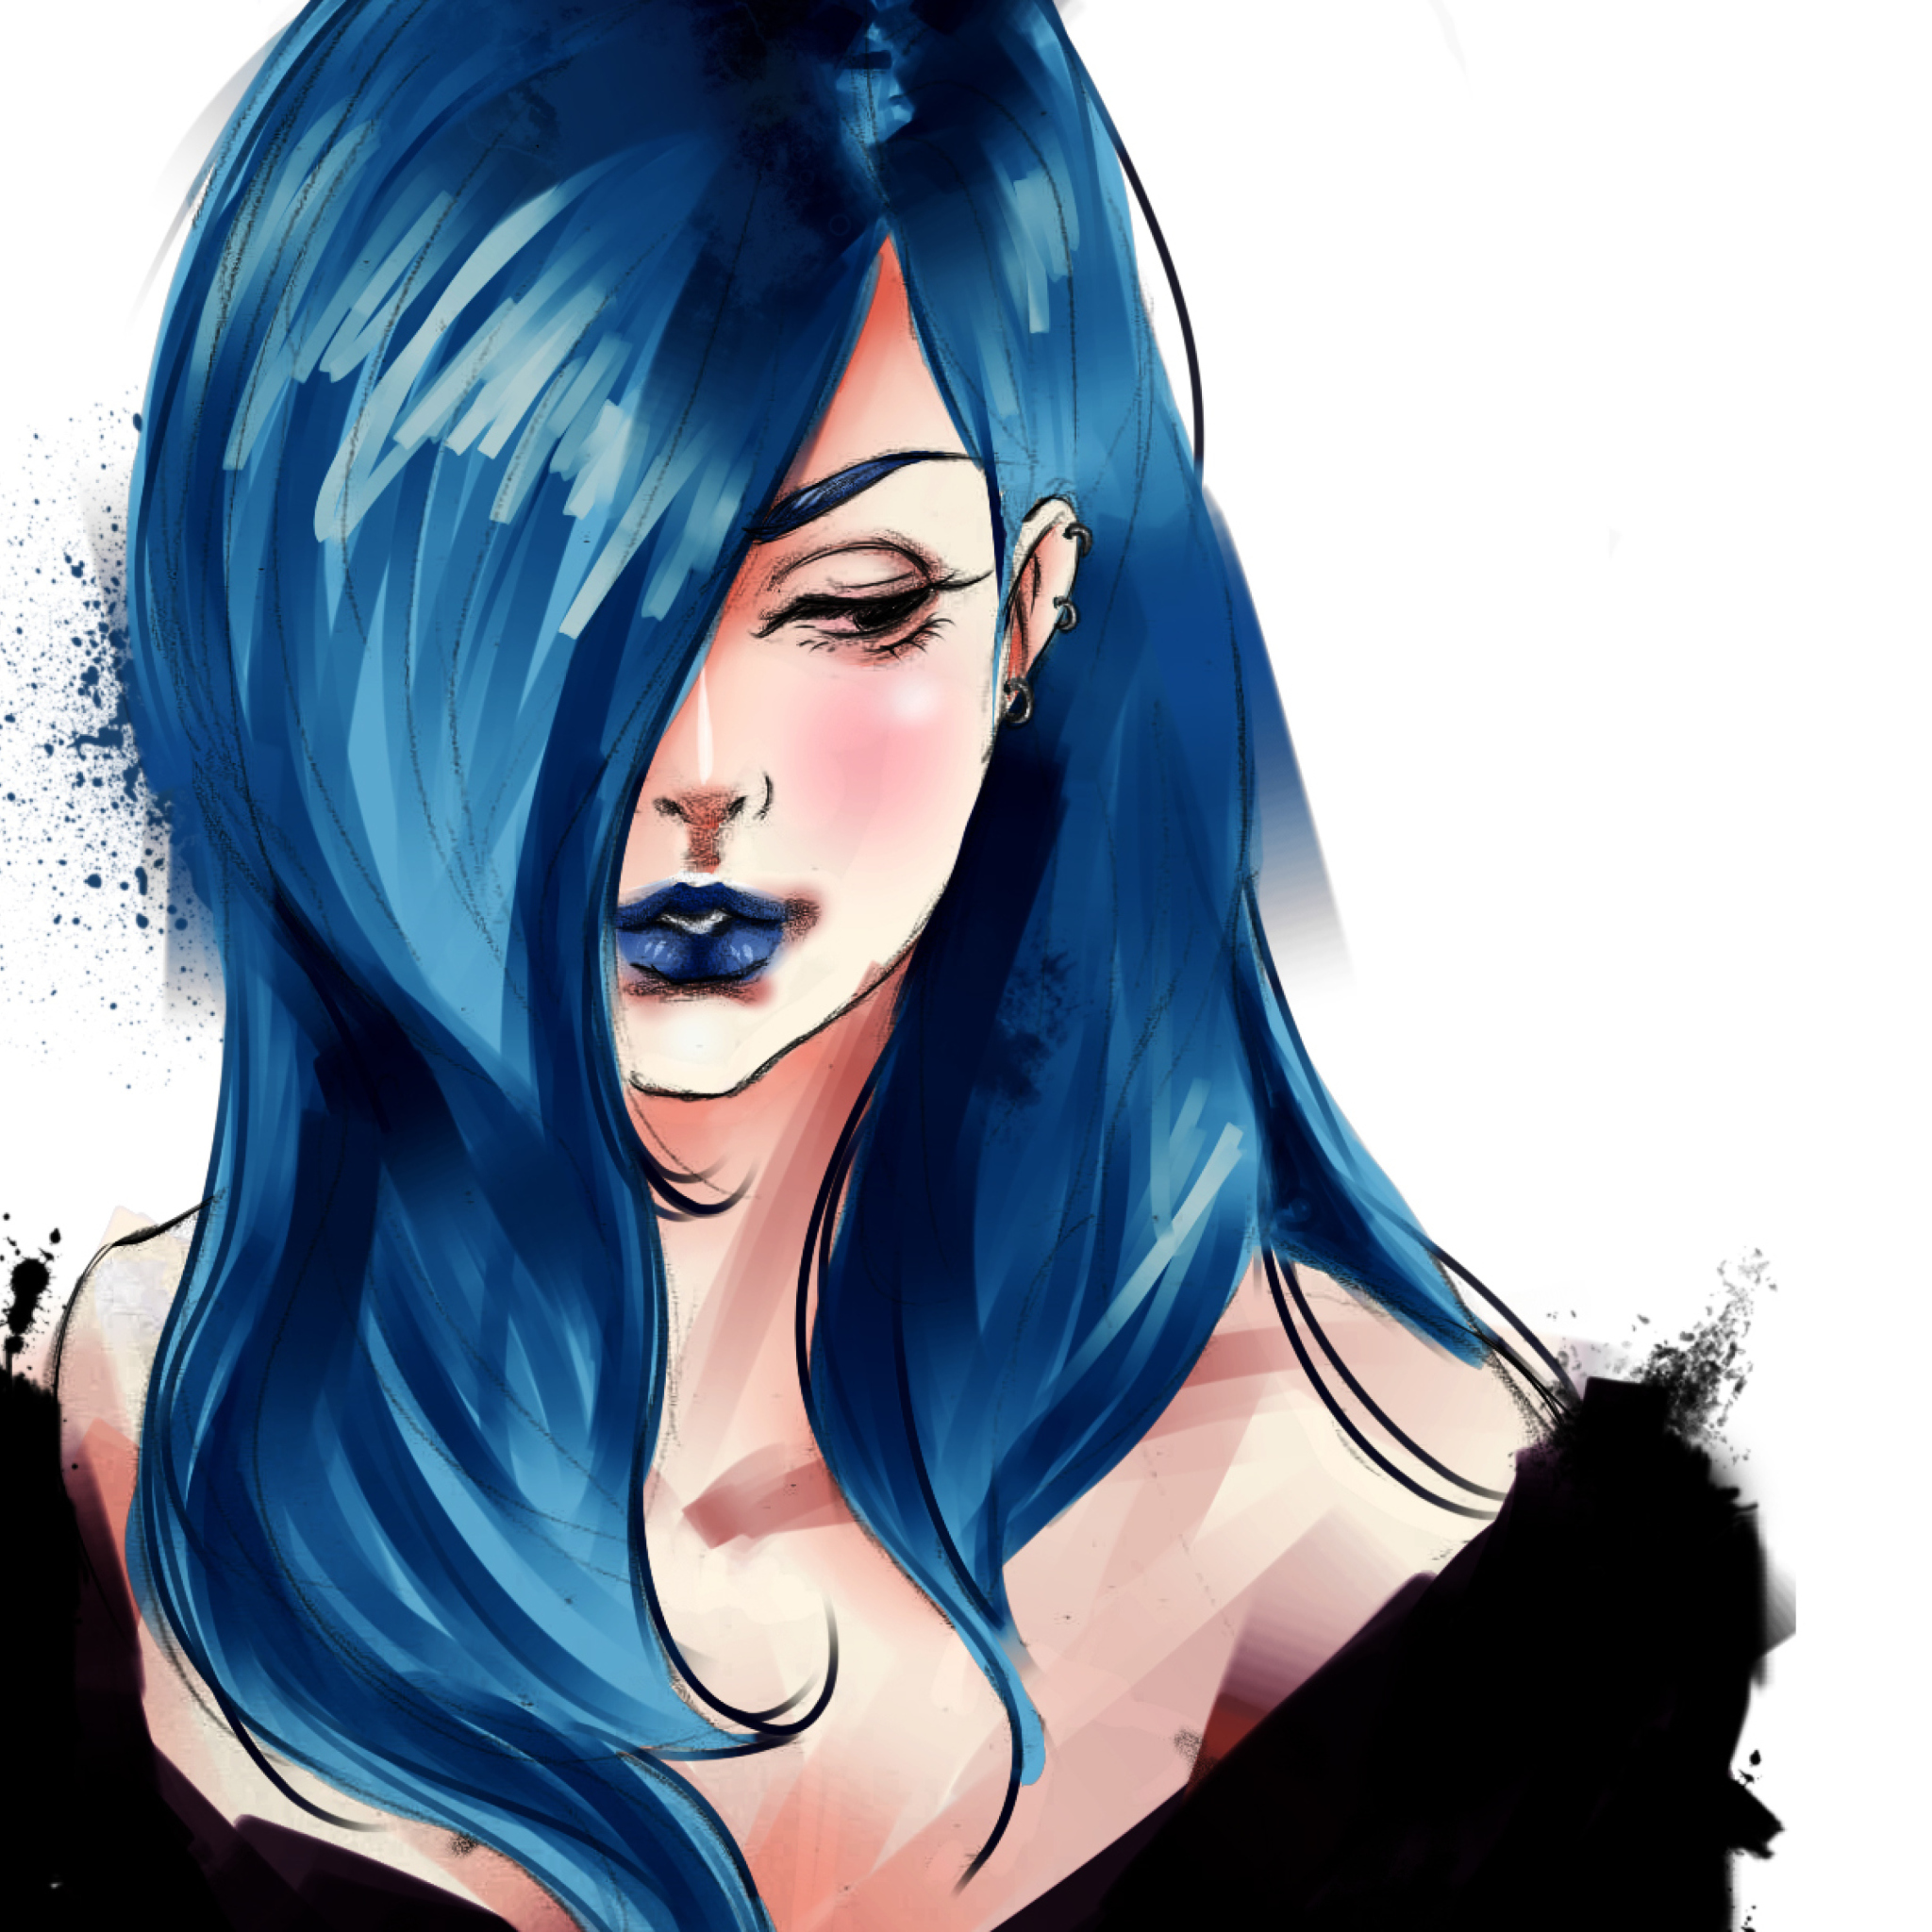 Das Girl With Blue Hair Painting Wallpaper 2048x2048